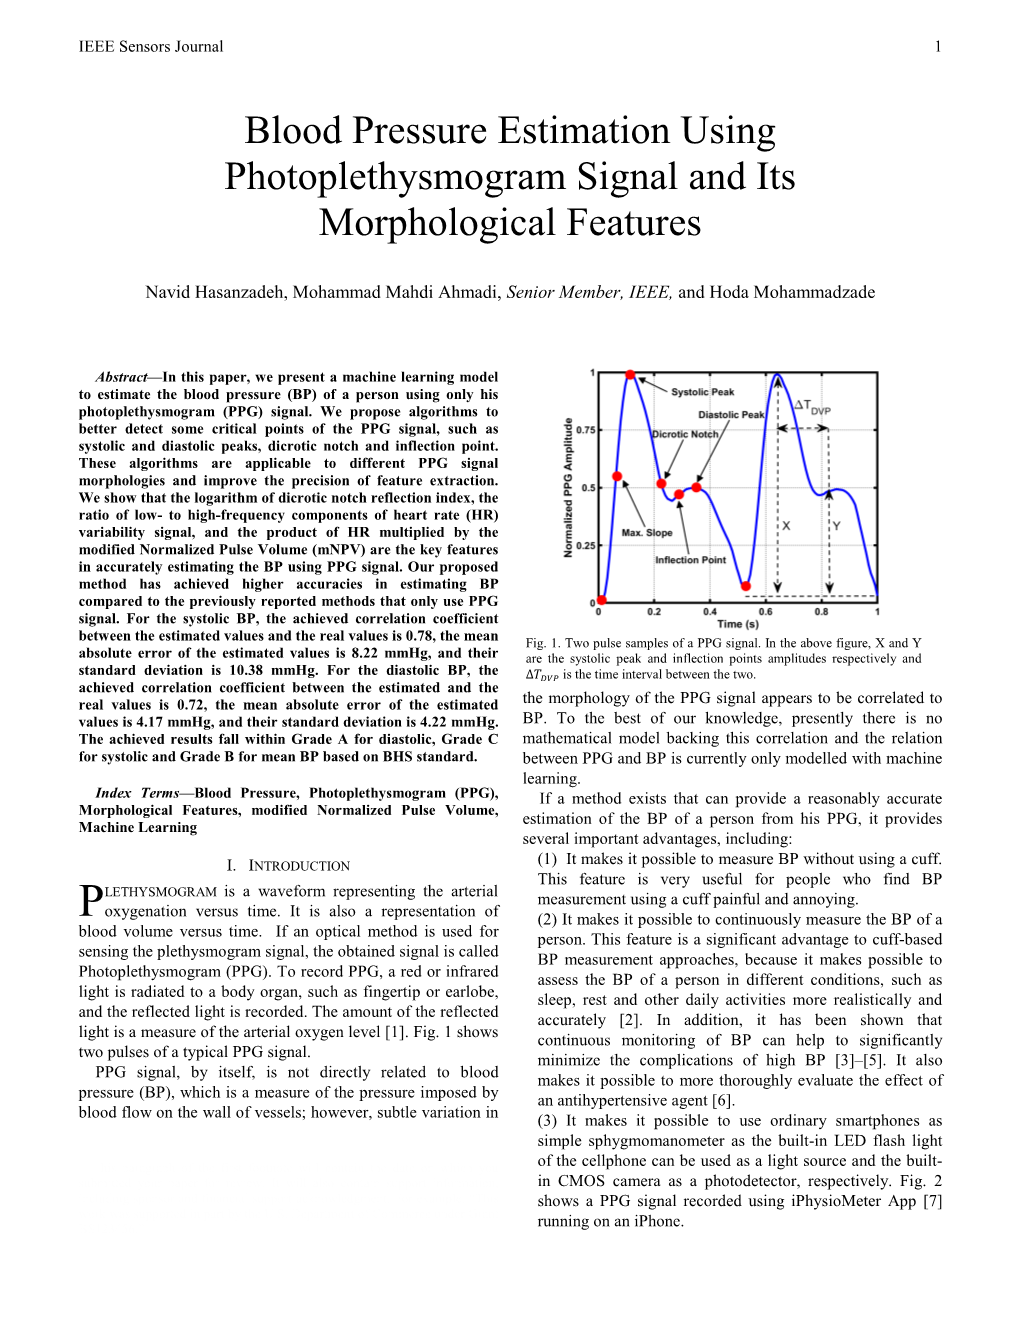 Blood Pressure Estimation Using Photoplethysmogram Signal and Its Morphological Features